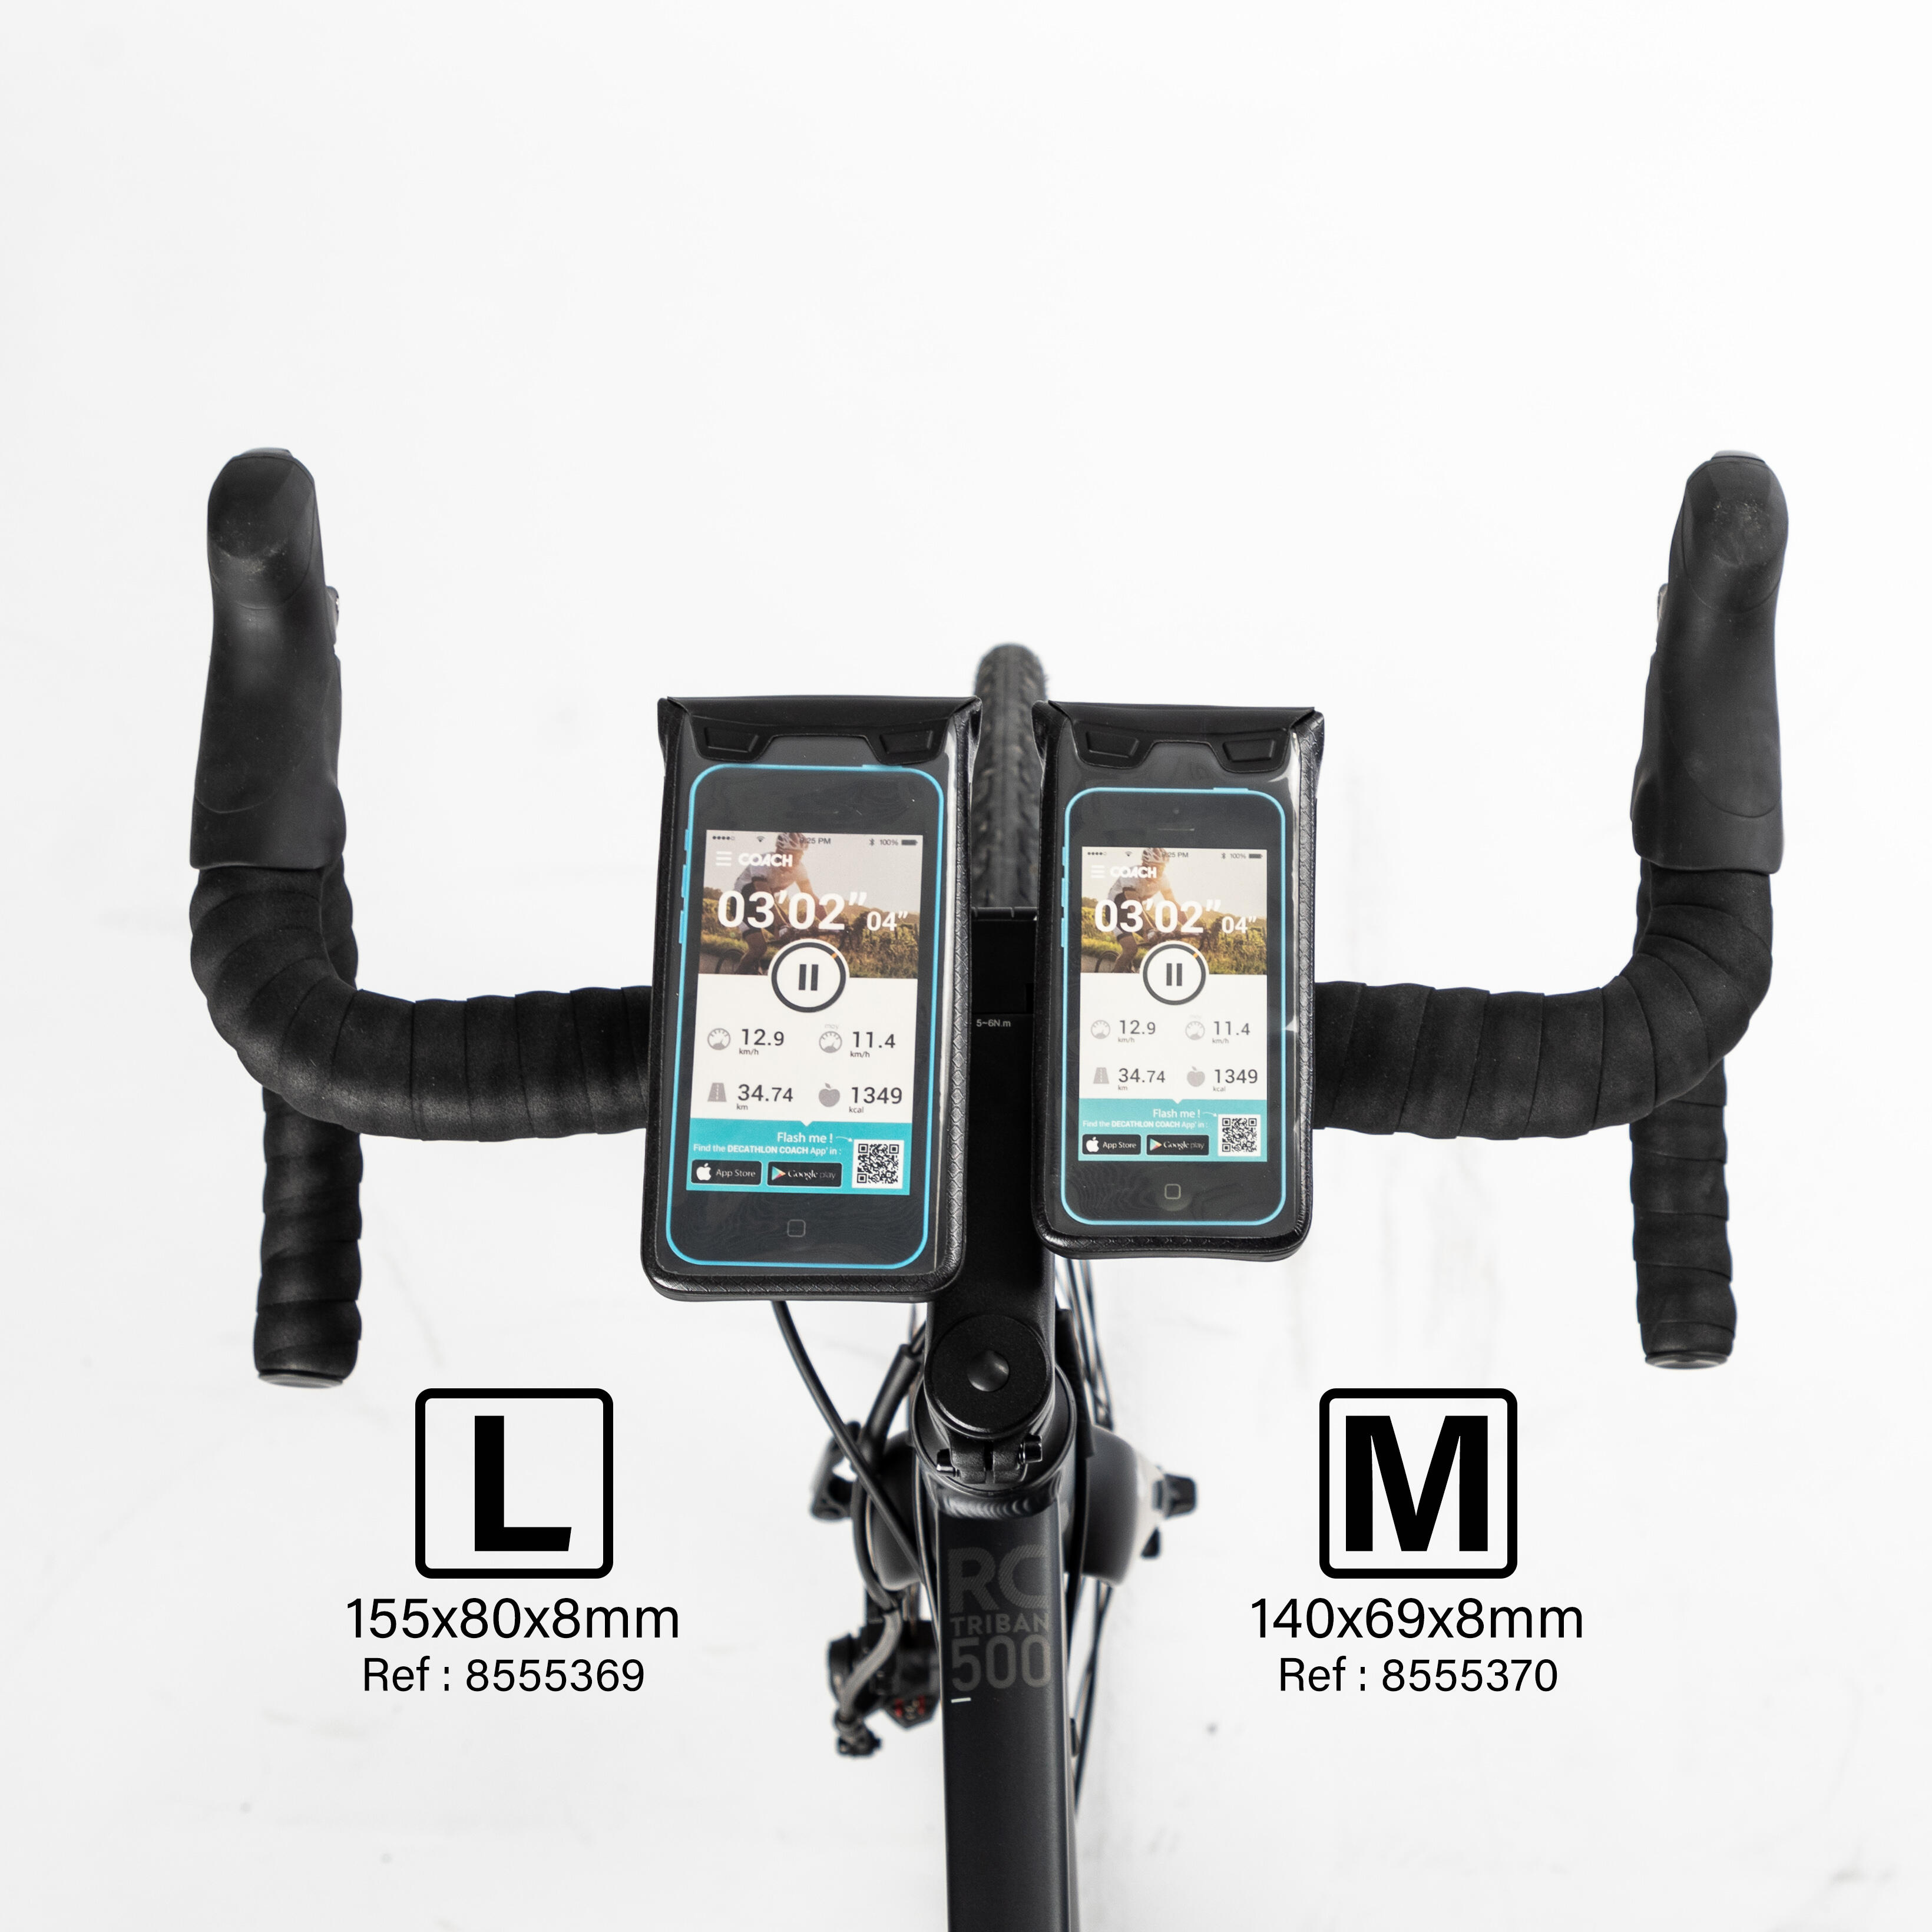 Cycling Waterproof Mobile Phone Holder 900L - One Size By TRIBAN | Decathlon